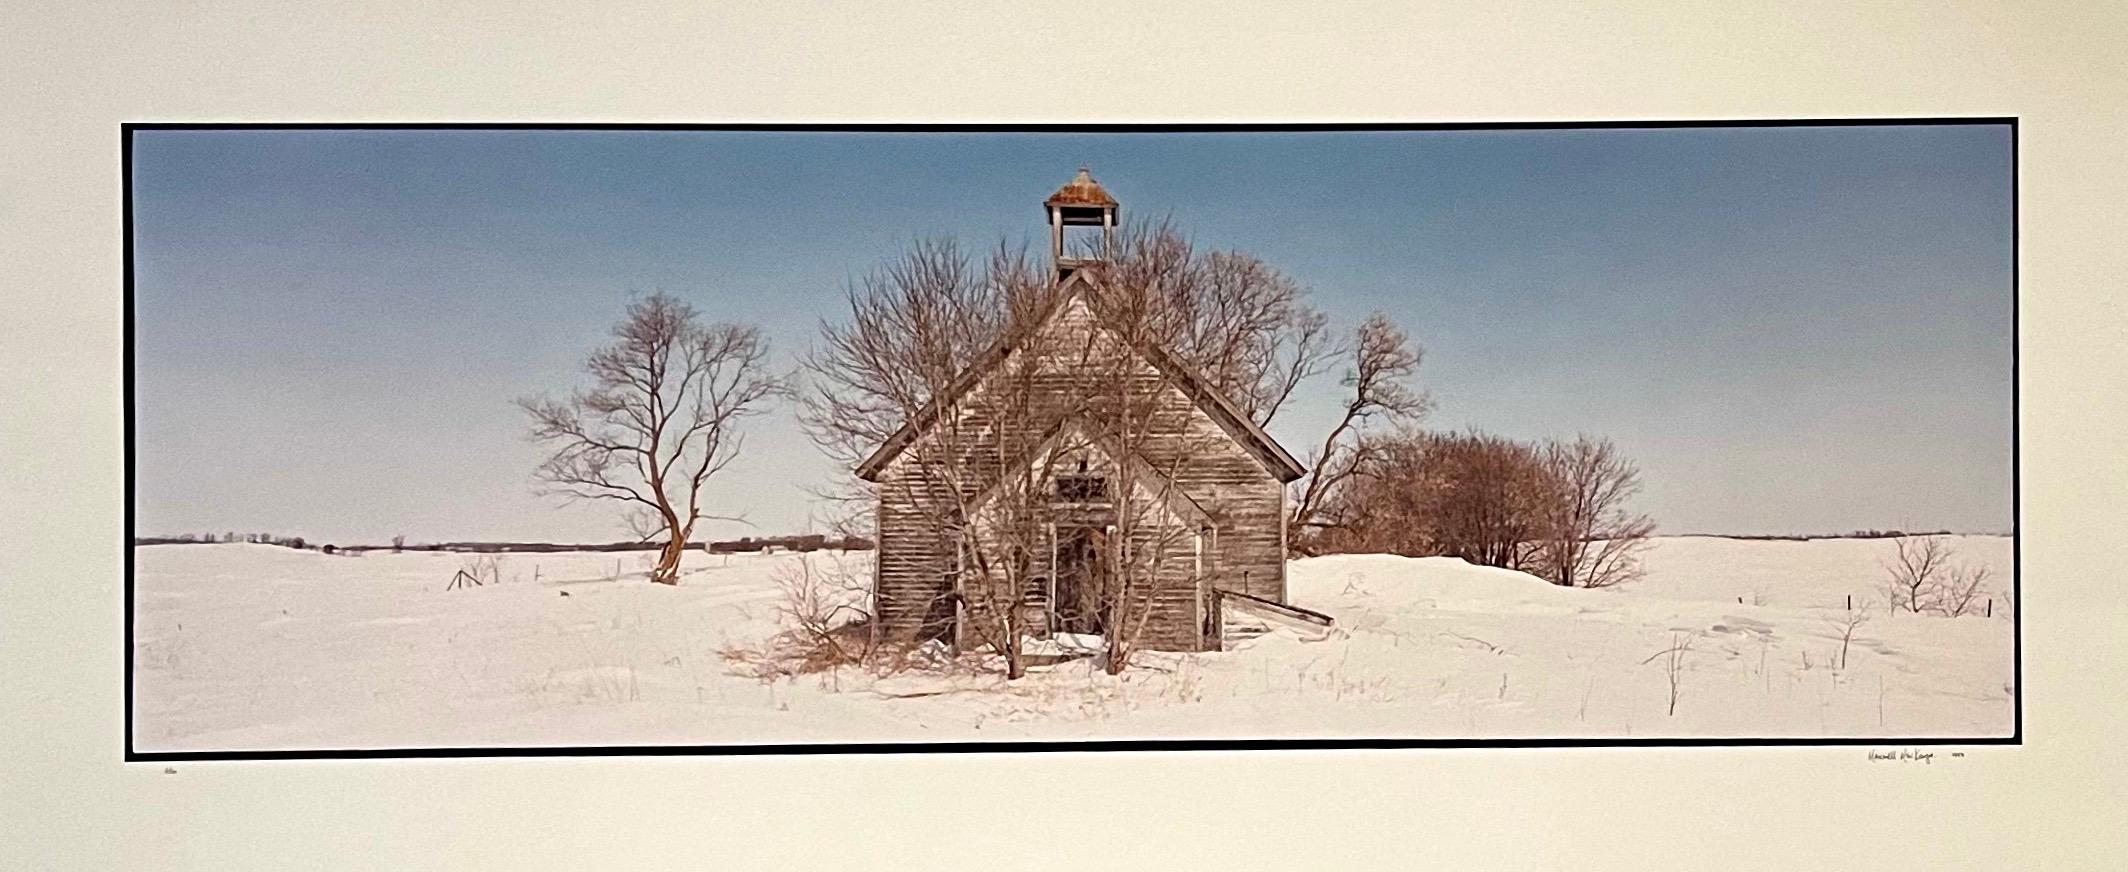 Everts Township Schoolhouse, Winter, Large Panoramic Color Photograph Signed 